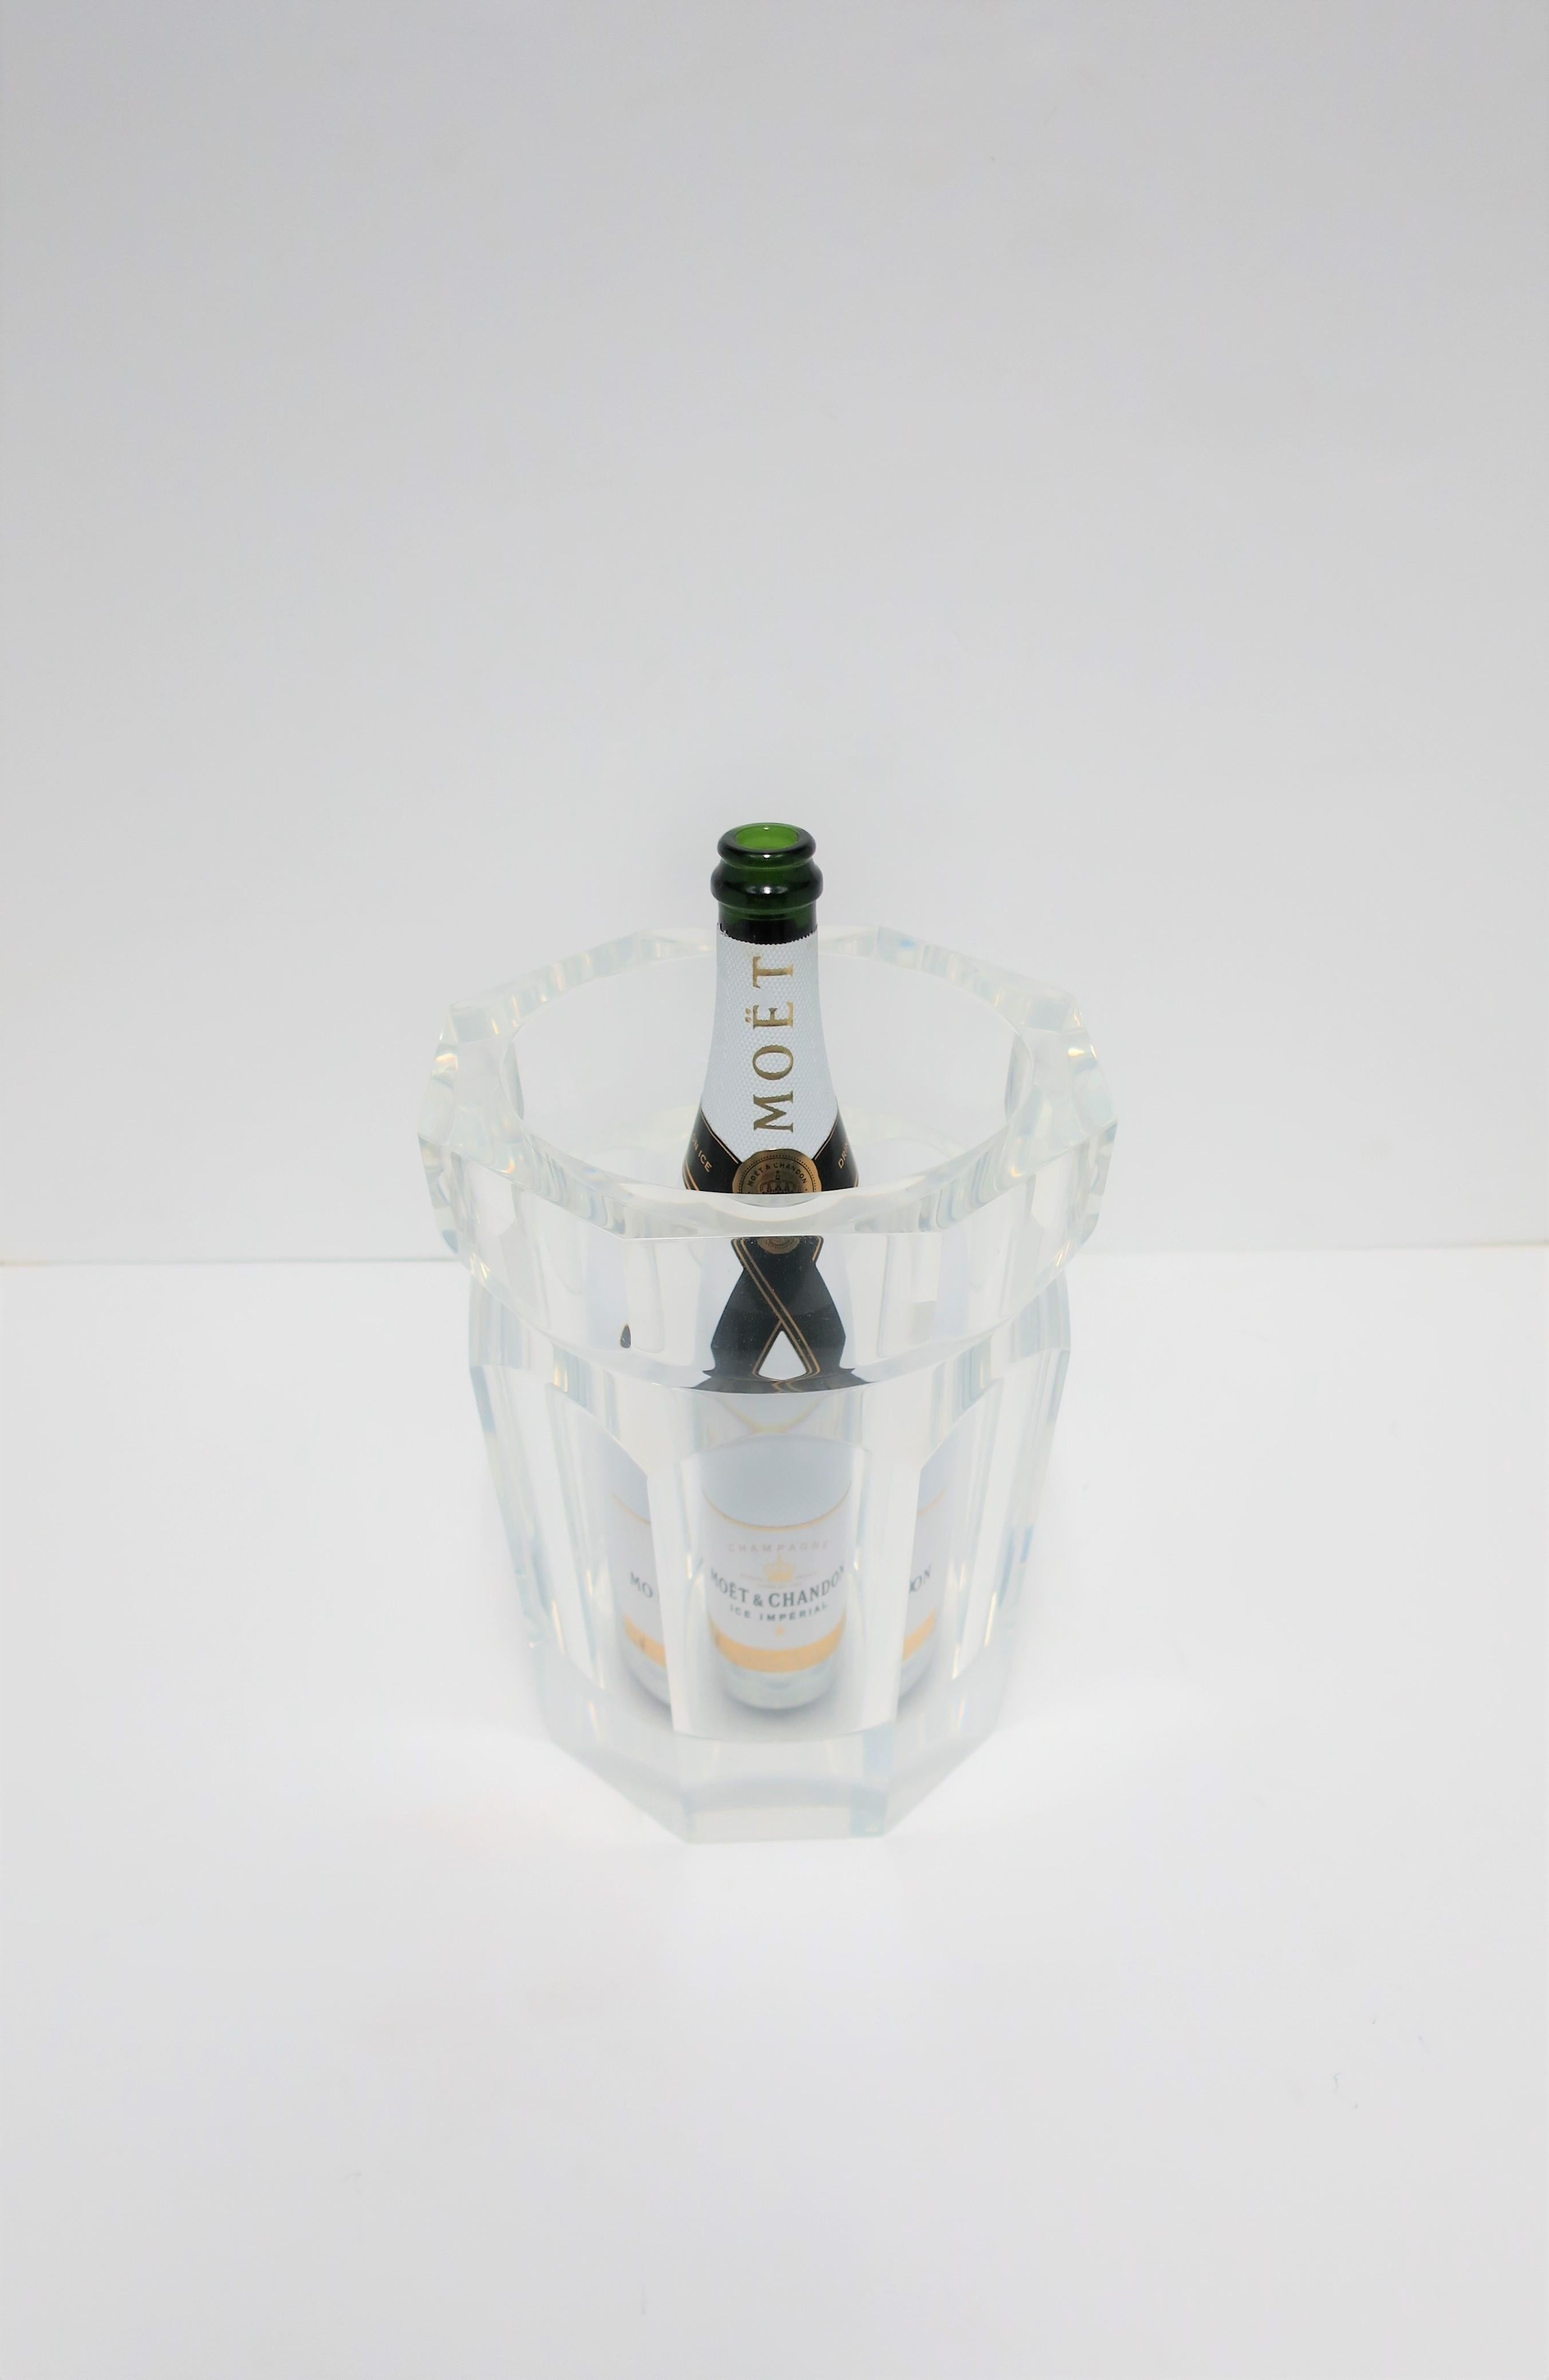 This is a very beautiful, substantial, and well made octagonal Lucite Champagne or wine cooler/holder or ice bucket, circa 1990s or later. Piece measures 1 inch thick or more. Shown with Champagne bottle in several images for size/perspective. A